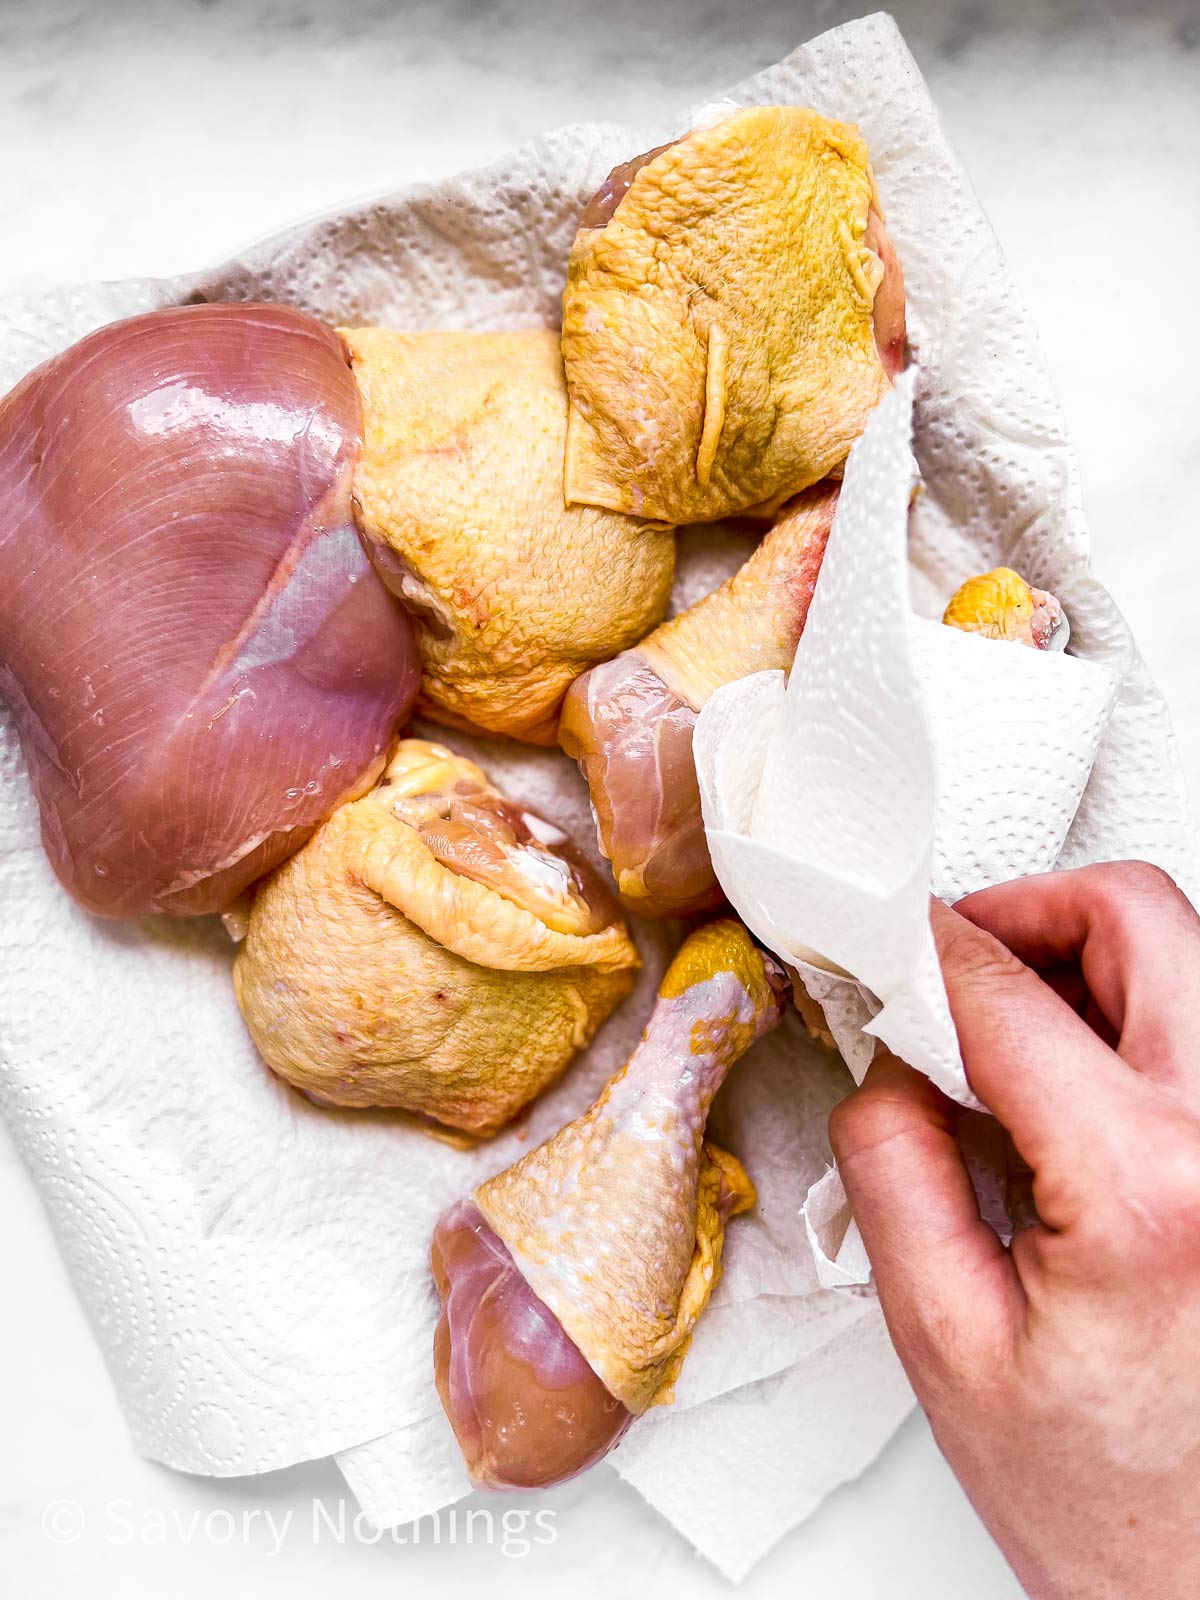 female hand using paper towels to pat dry raw chicken pieces